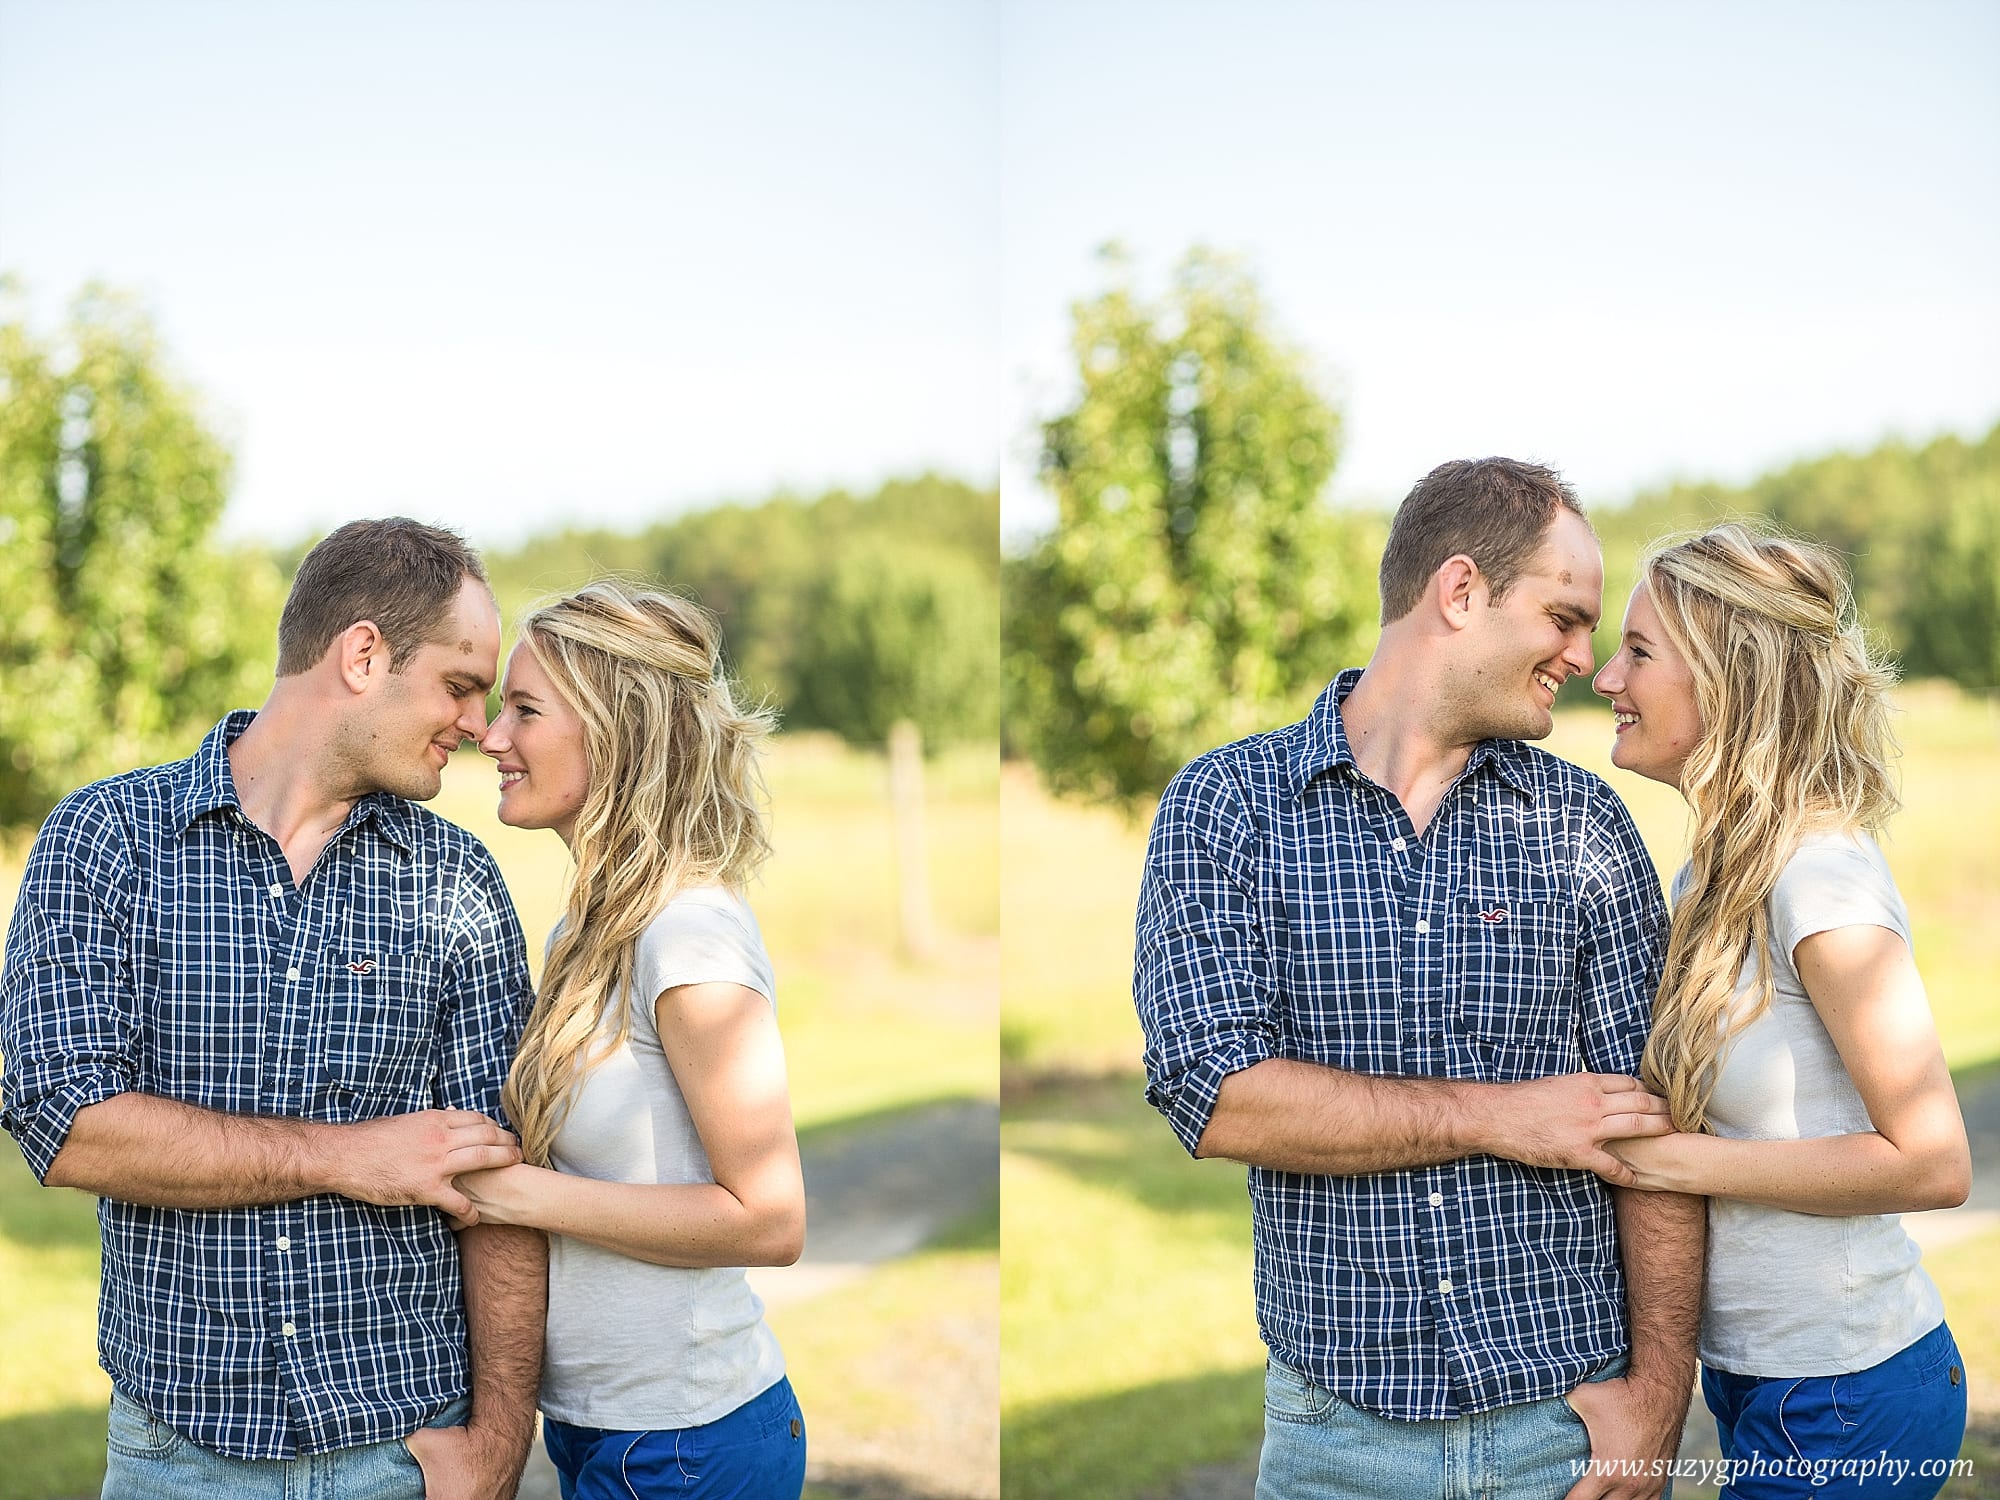 engagements-new orleans-texas-baton rouge-lake charles-suzy g-photography-suzygphotography_0025